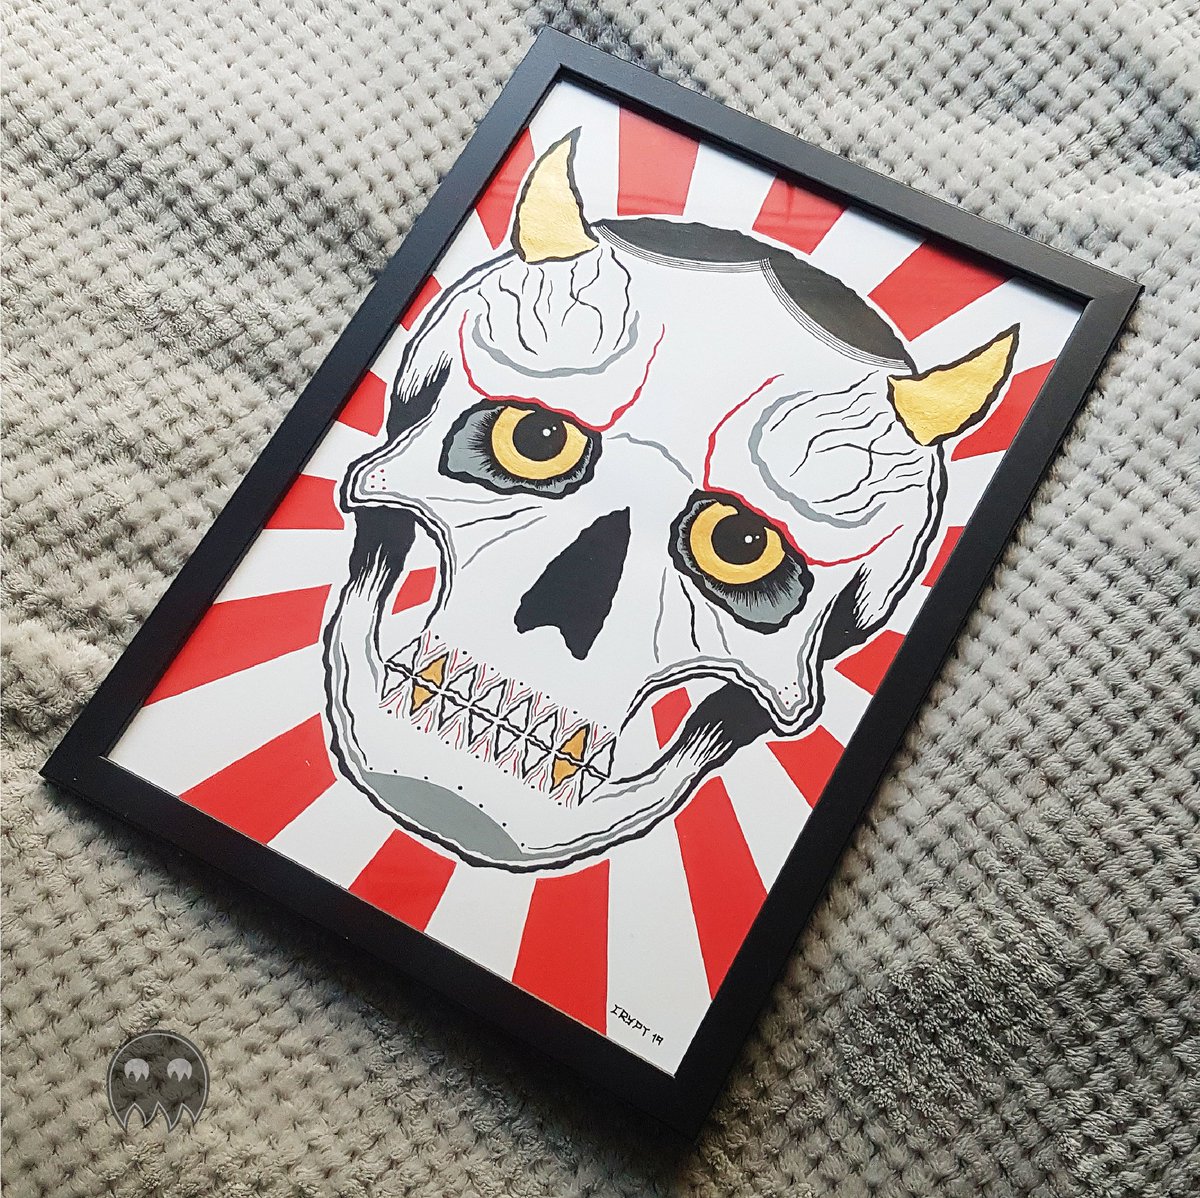 hannya (a3)made with posca markers and gold acrylic paint (it's dried like a foil print, the shine is ridiculous) https://robcryptx.bigcartel.com/product/hannya-jaggy-skull-painting-a3